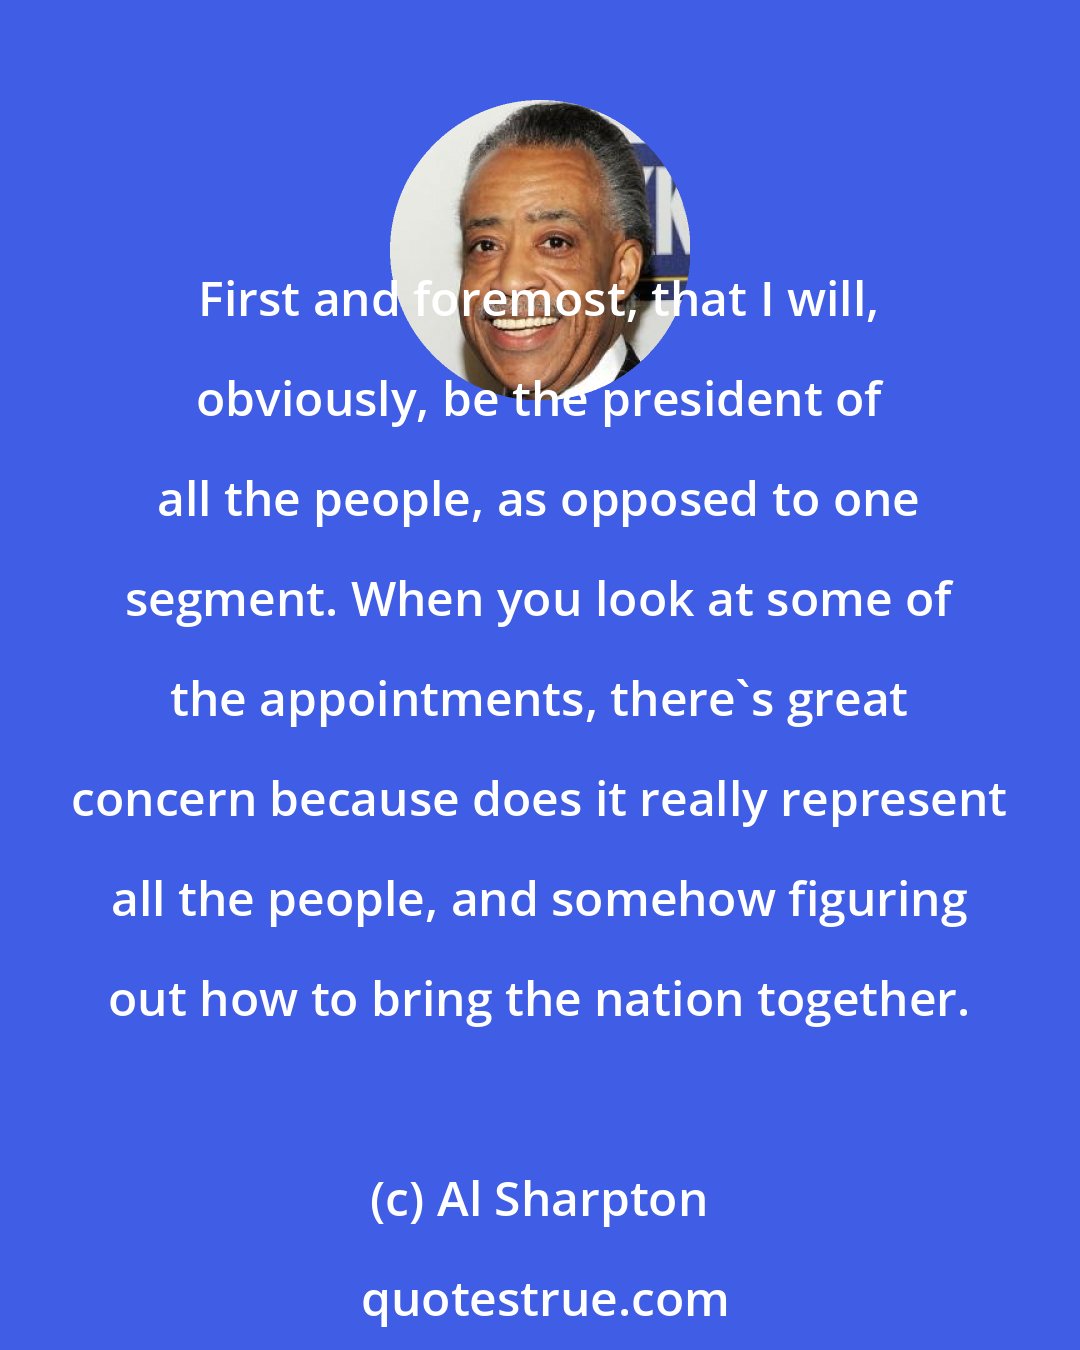 Al Sharpton: First and foremost, that I will, obviously, be the president of all the people, as opposed to one segment. When you look at some of the appointments, there`s great concern because does it really represent all the people, and somehow figuring out how to bring the nation together.